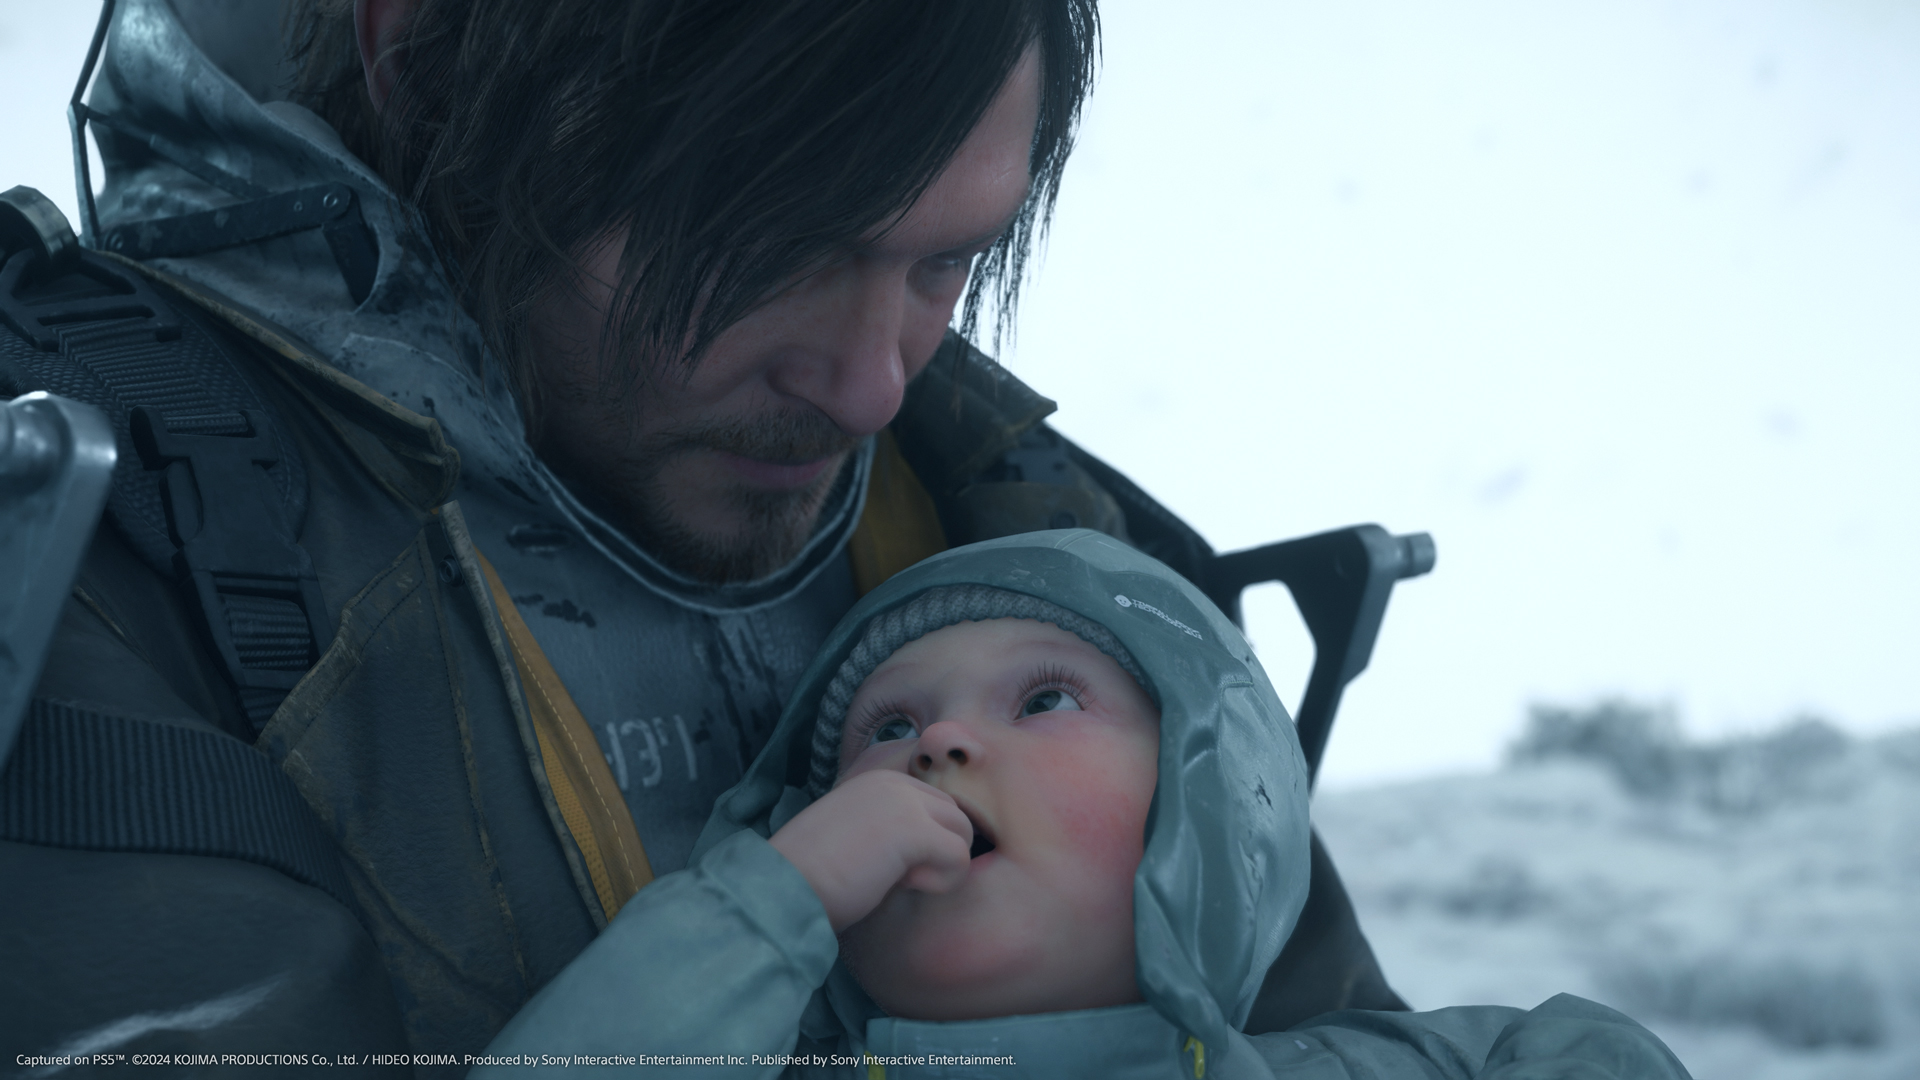 Sam (Norman Reedus) cradles baby Lou in close-up in Death Stranding 2